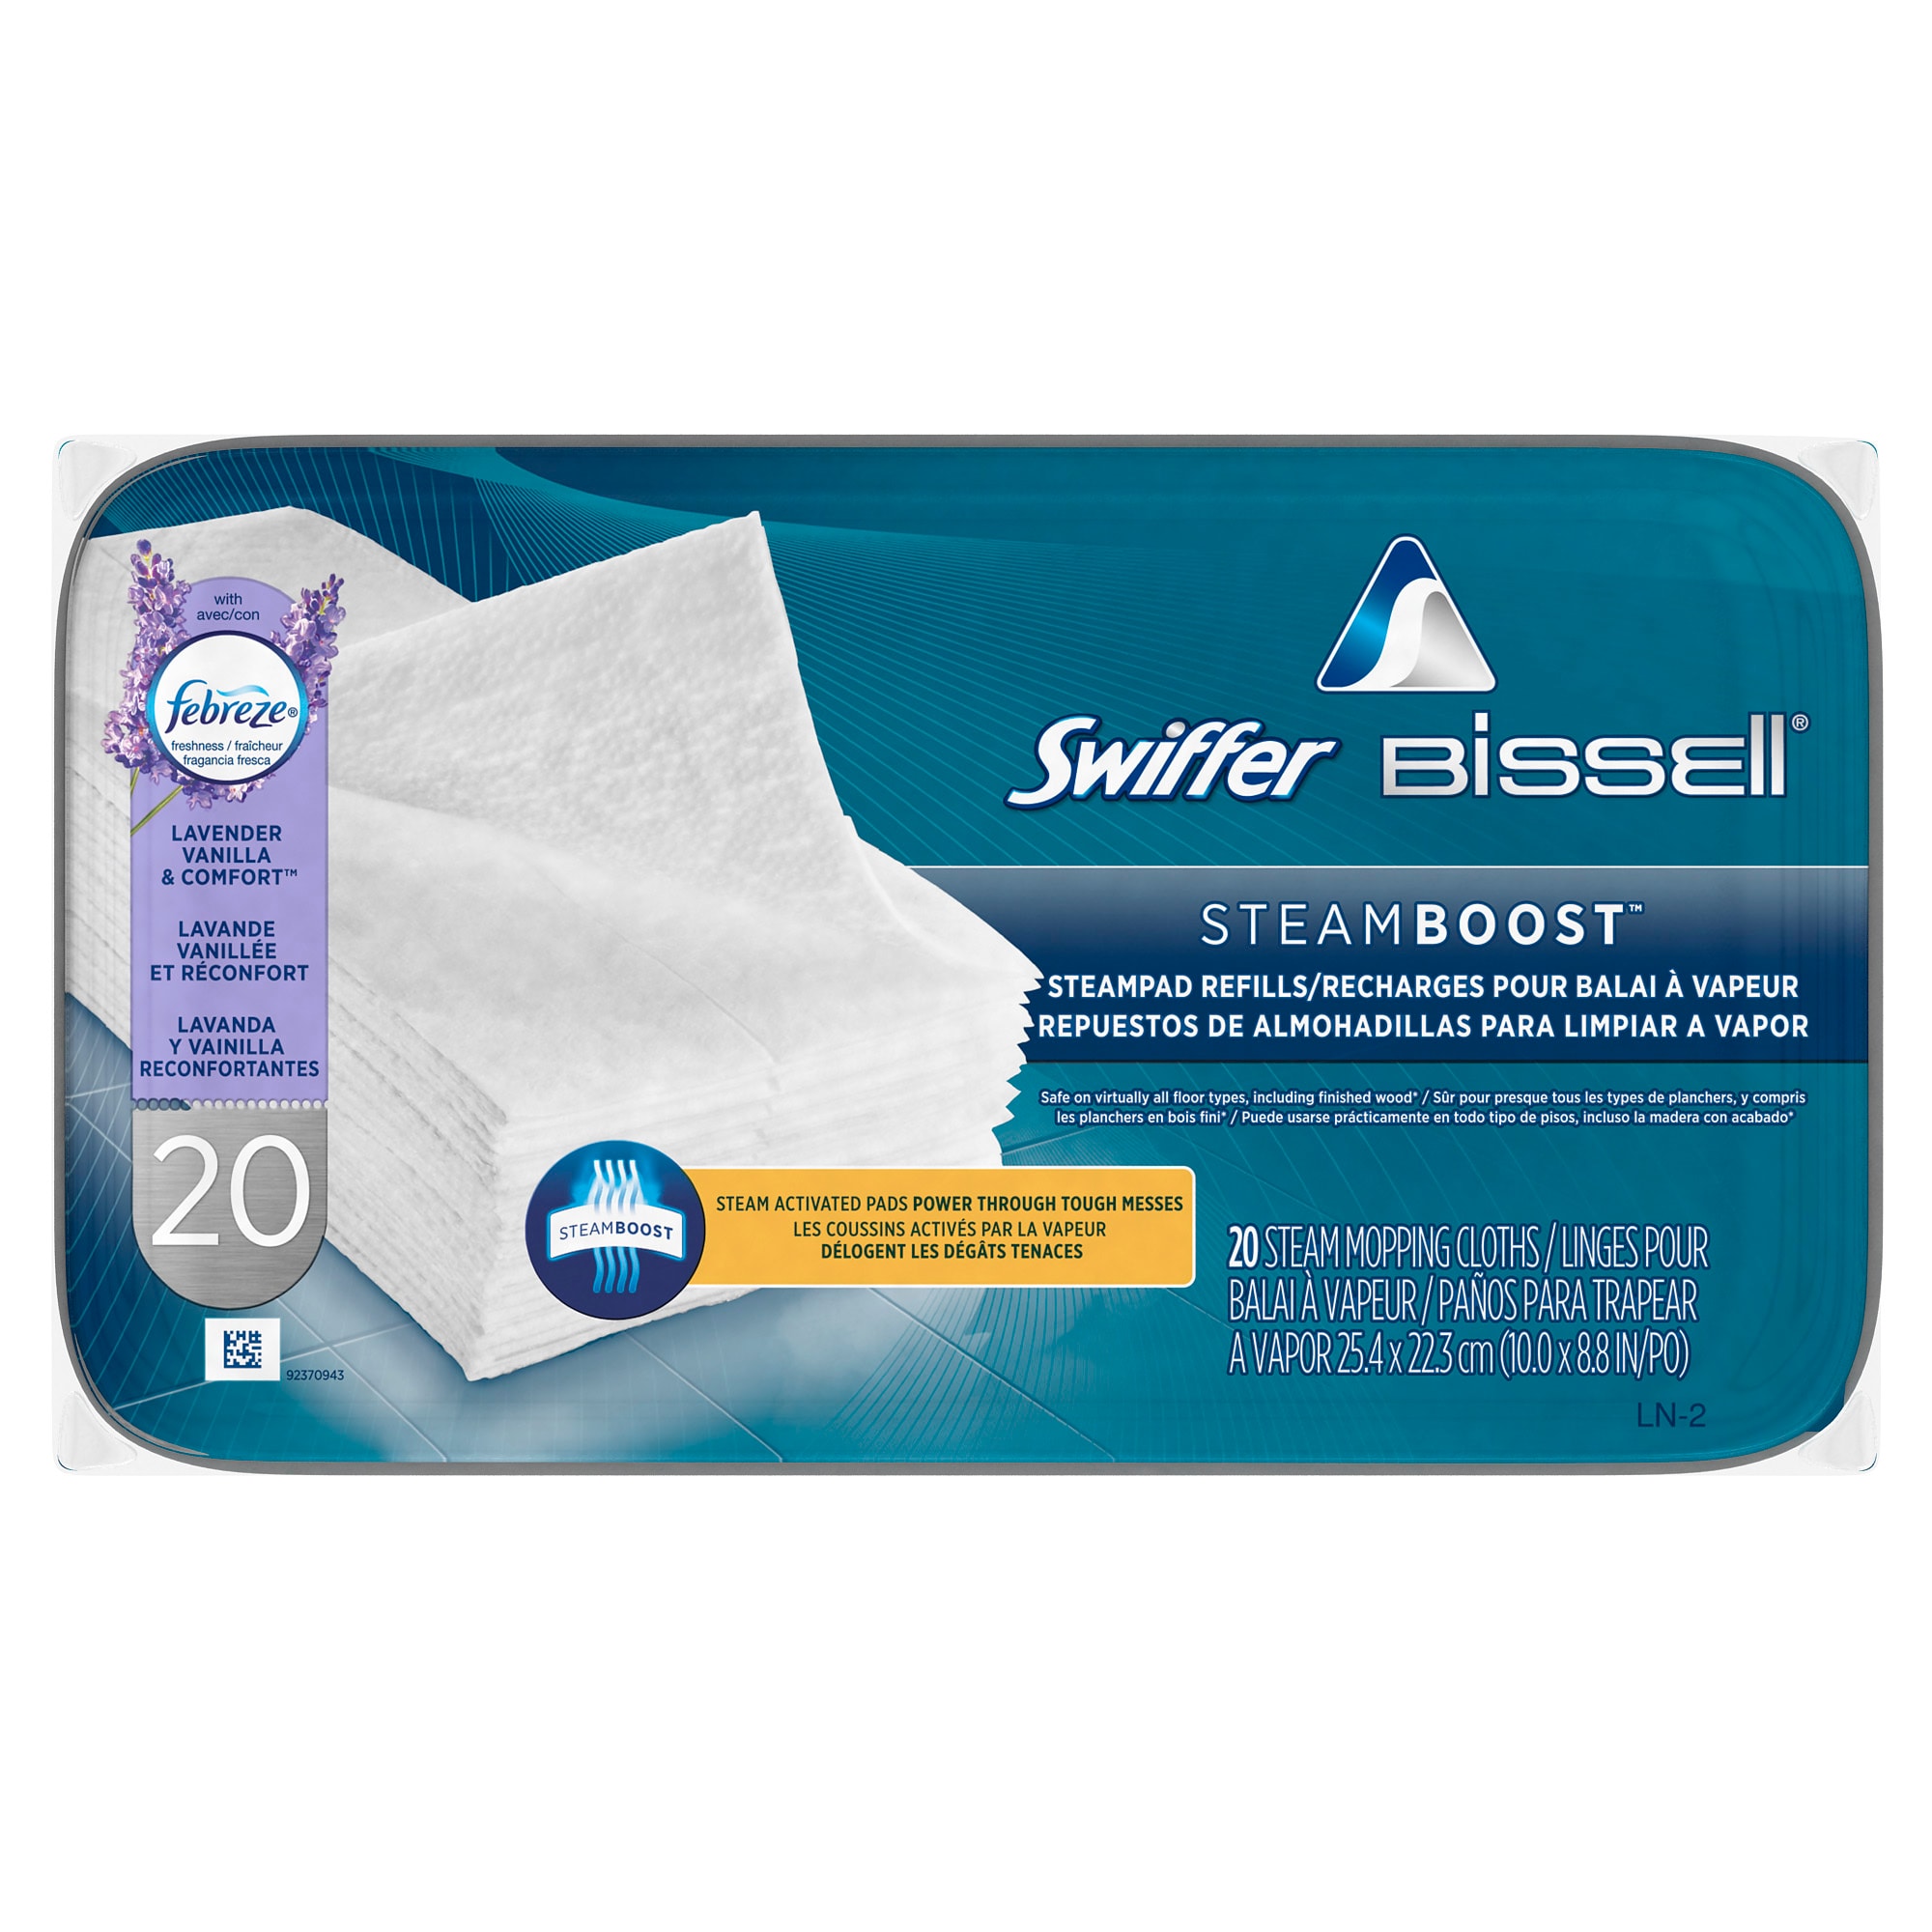 3 Reusable Replacement Microfiber Pads Compatible w/ Swiffer Bissell Steamboost 